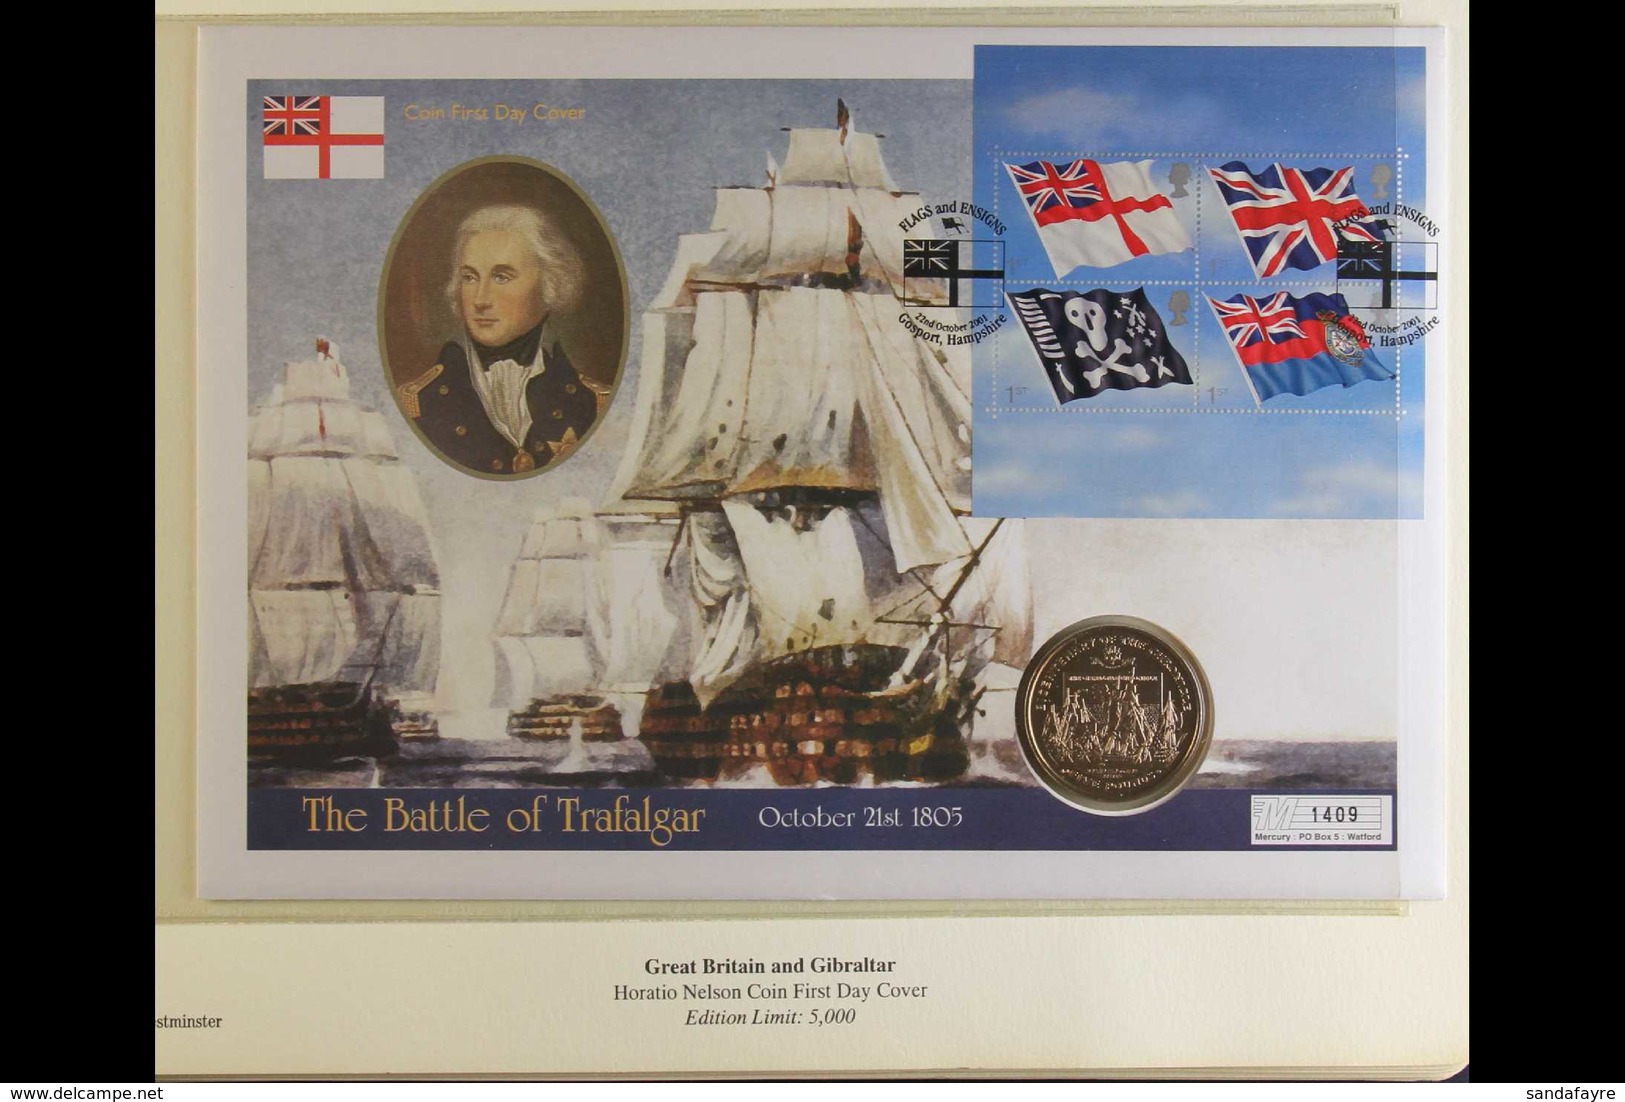 SHIPS - ROYAL NAVY 2001 Westminster Collection Of All Different British Commonwealth Illustrated Unaddressed First Day C - Unclassified